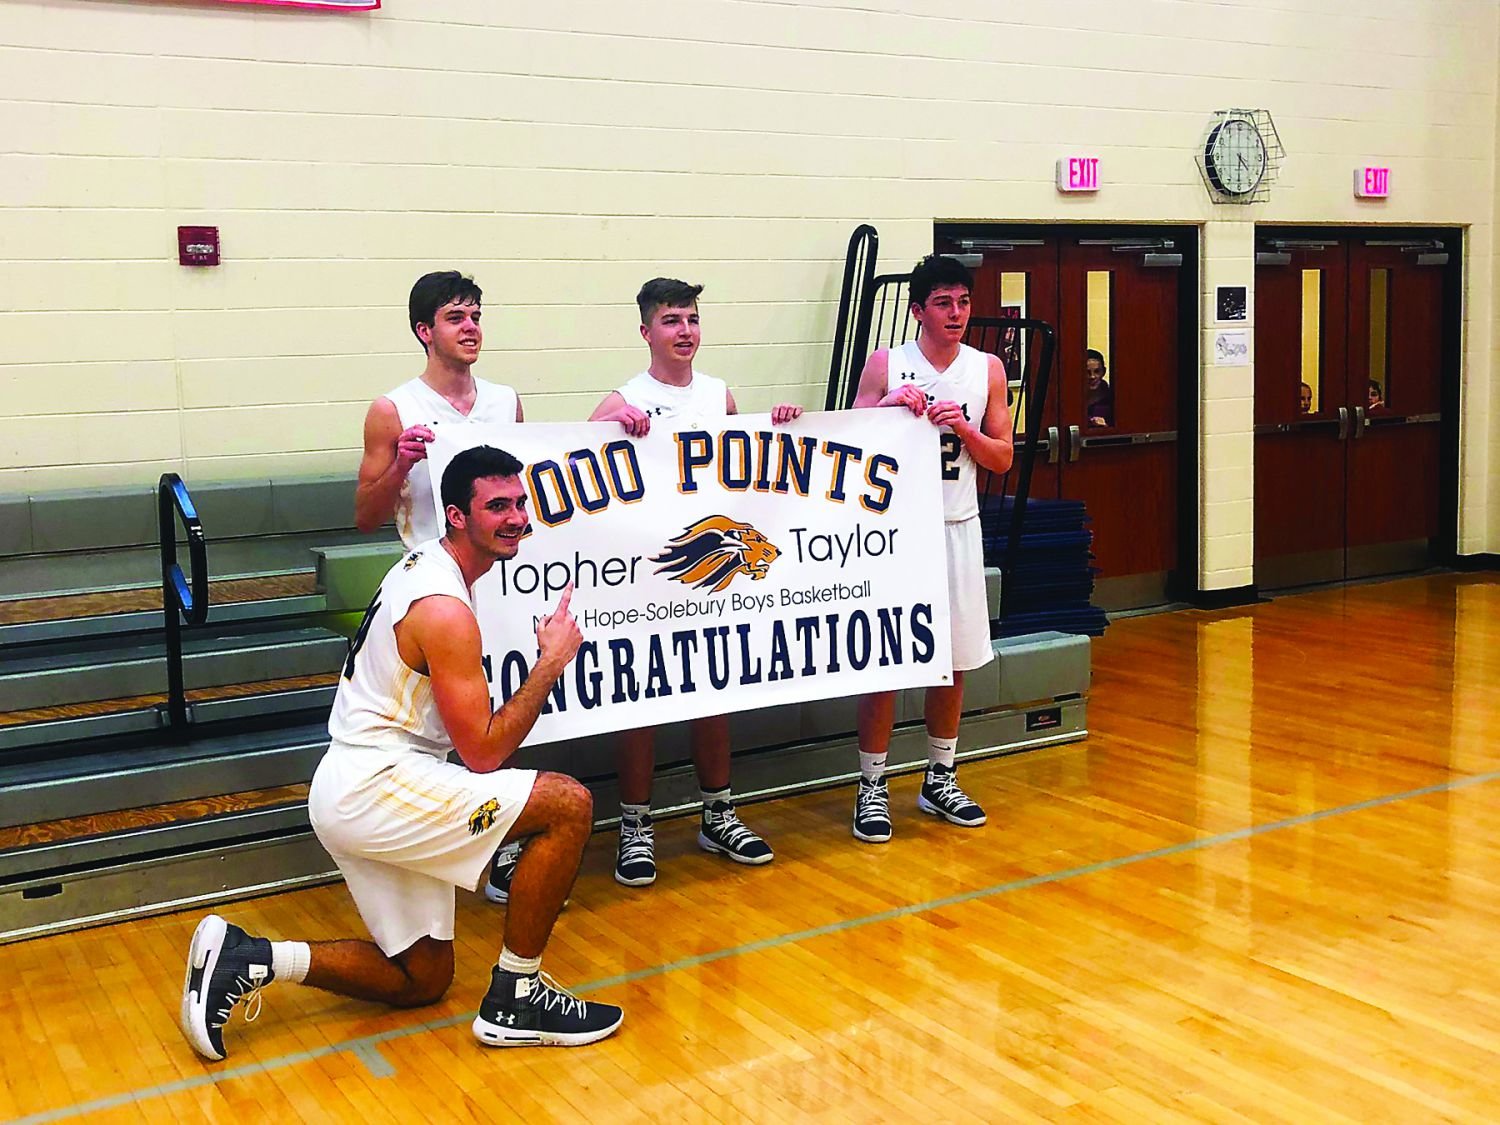 New Hope-Solebury senior Topher Taylor, kneeling, tallied his 1,000th career point March 9 in the Lions’ first state playoff win under longtime head coach Rick Fedele. Holding the celebration banner are, from left, seniors Connor Wallace, Logan Waterman and Pat Cooney.